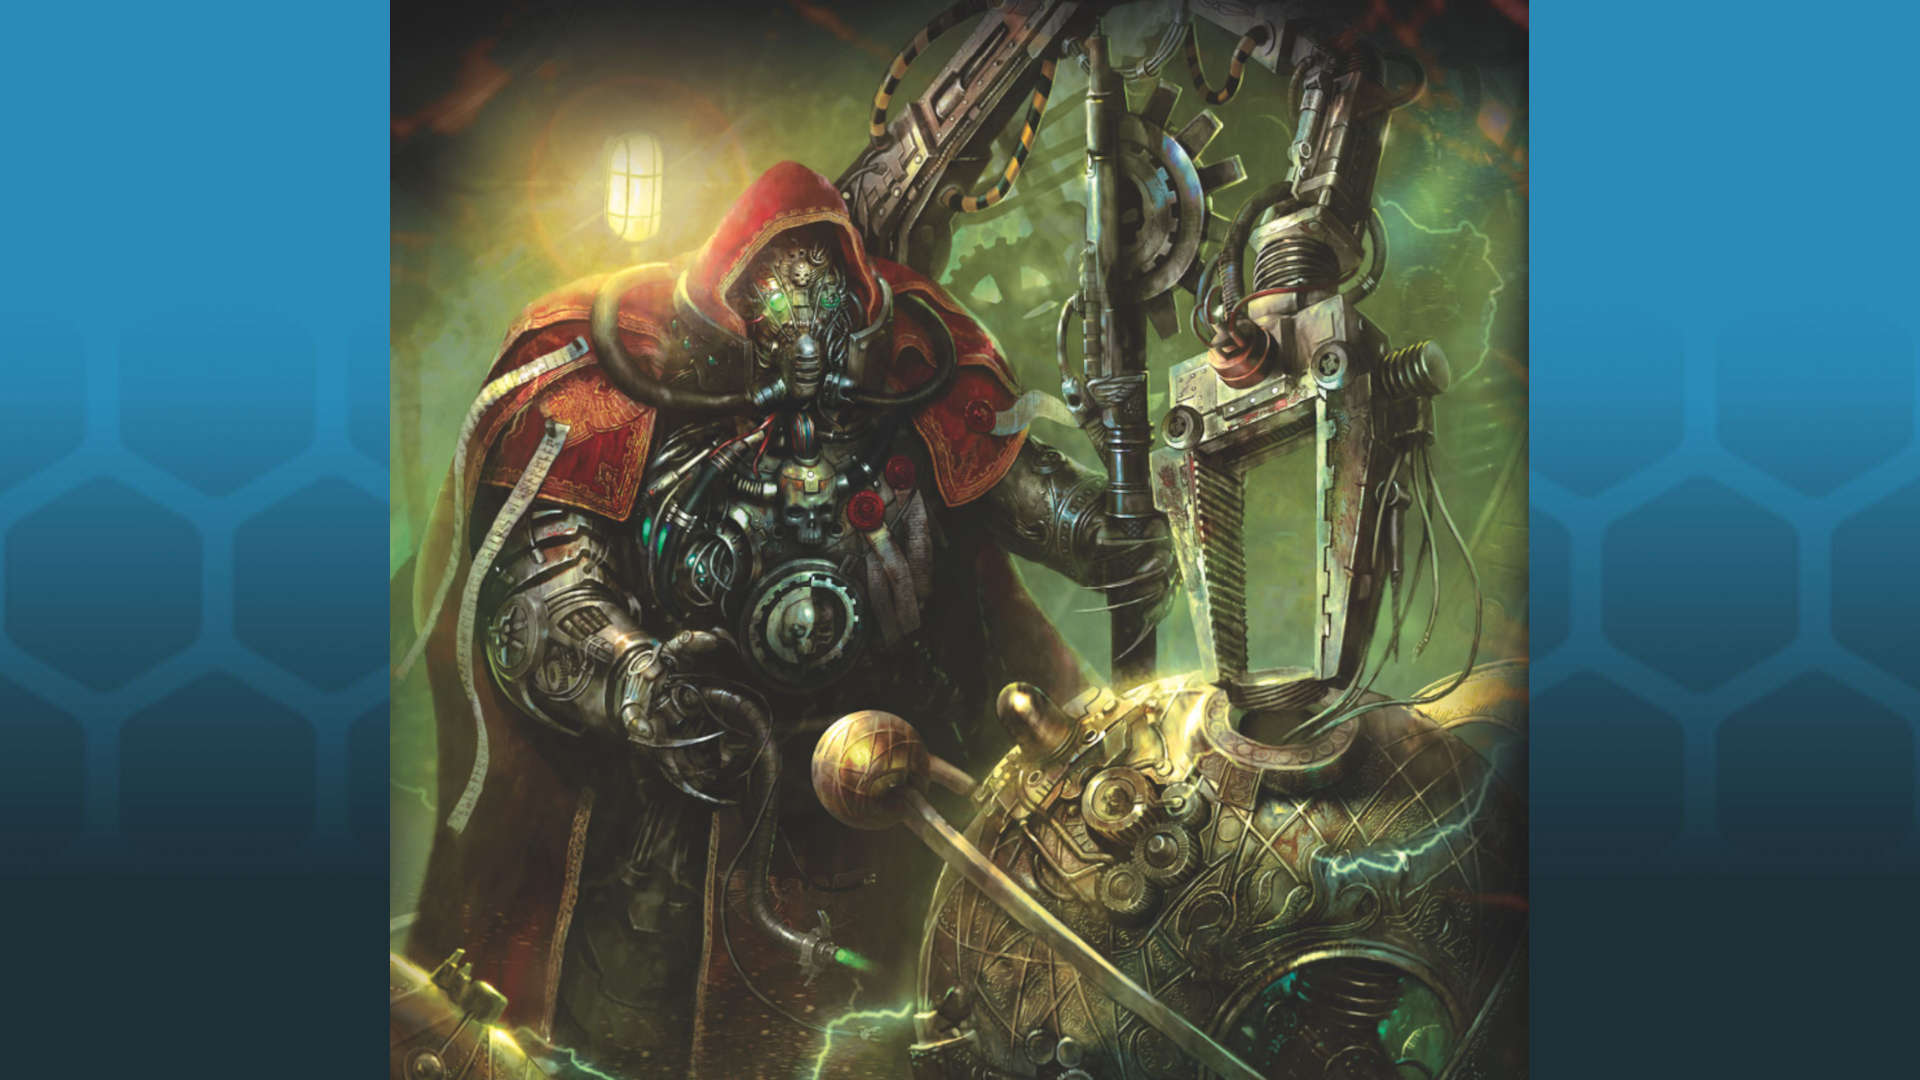 Imperium Maledictum RPG is out now (PDF available now, physical for  preorder) : r/Warhammer40k